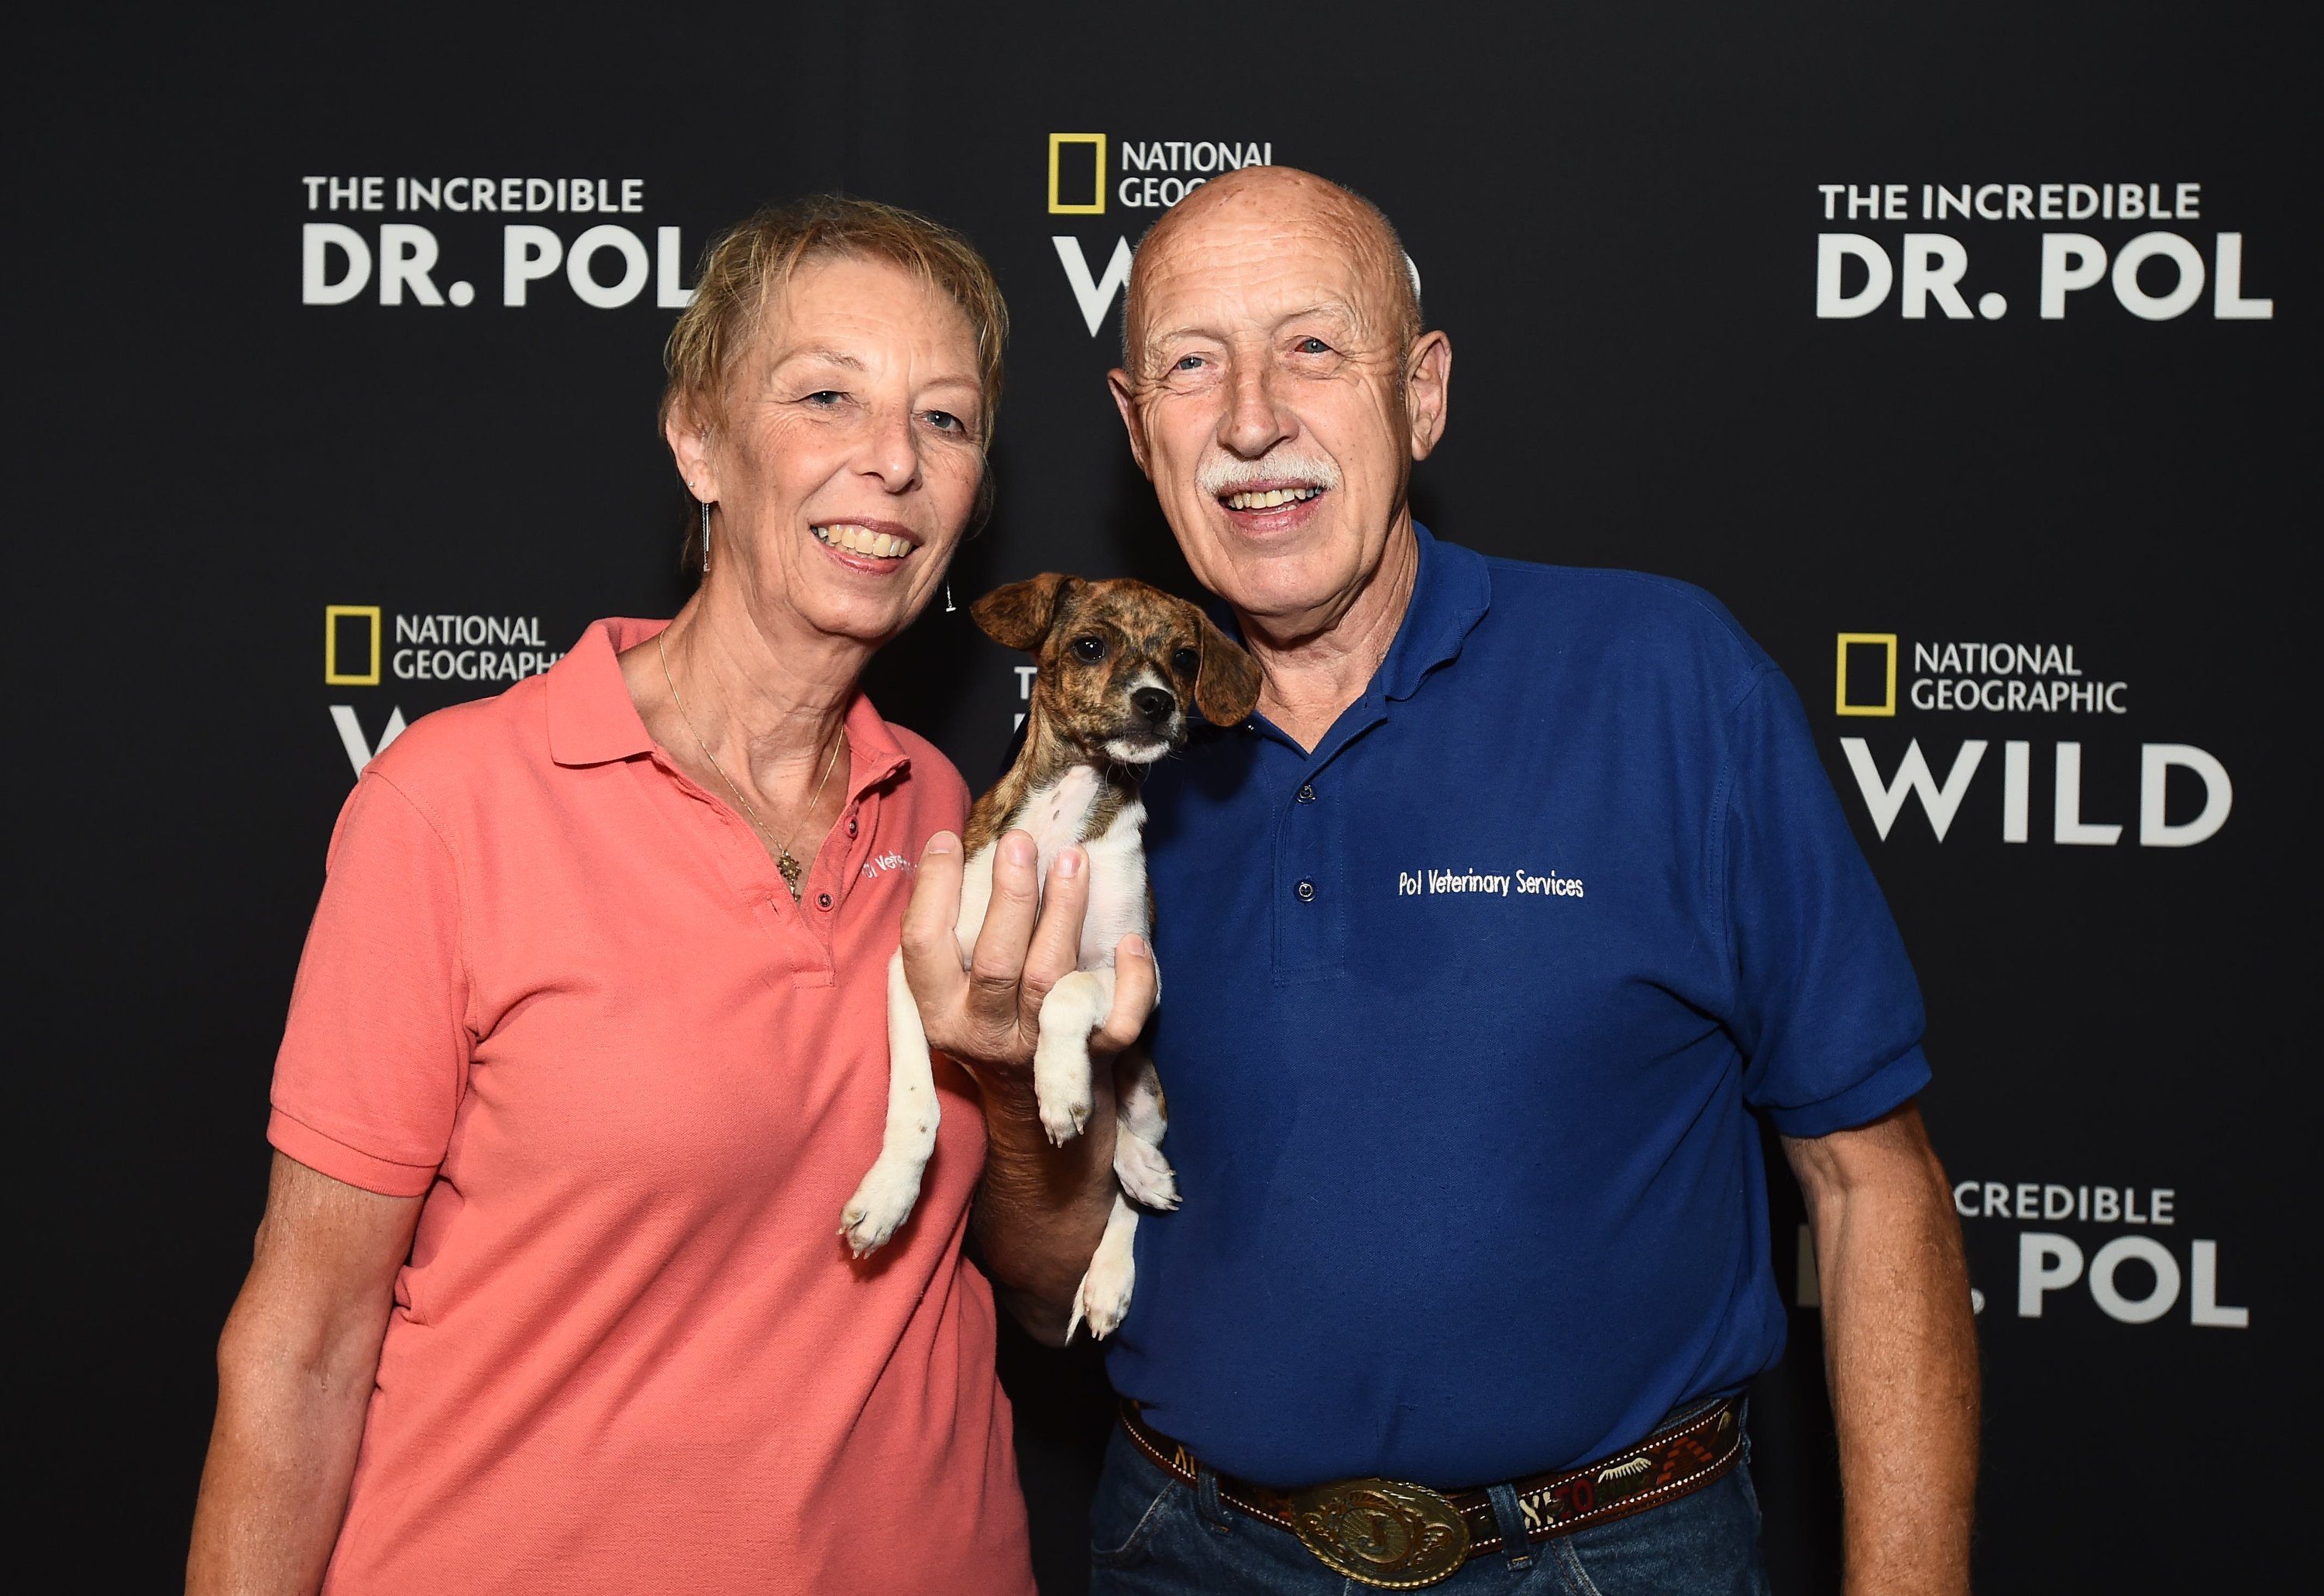 Diane Pol and Dr. Jan Pol of 'The Incredible Dr. Pol'